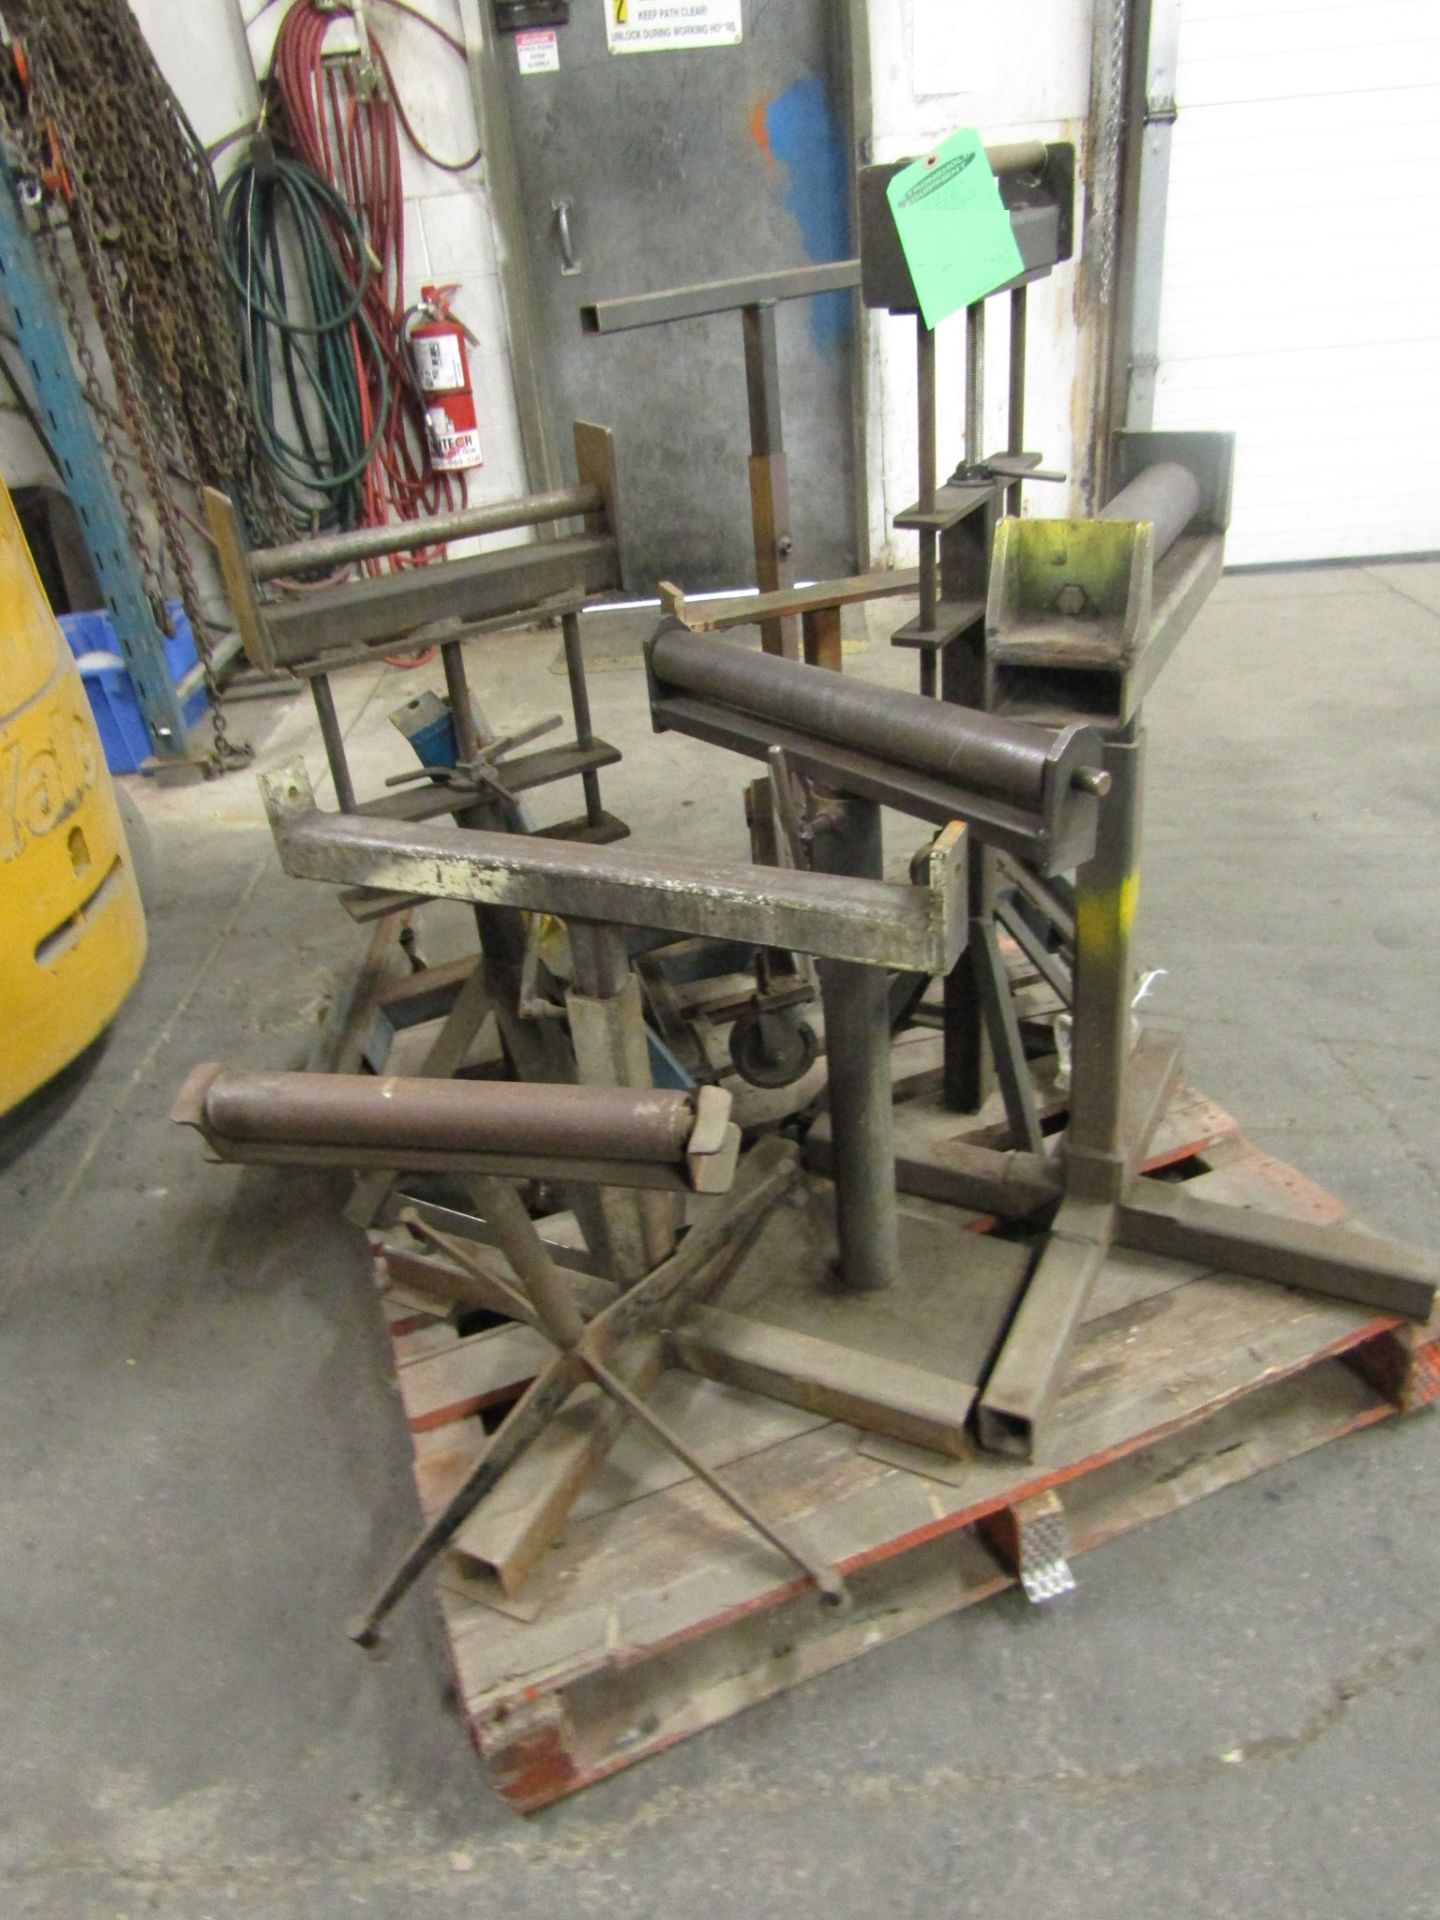 Lot of Saw roller extension - for long pipe/bar